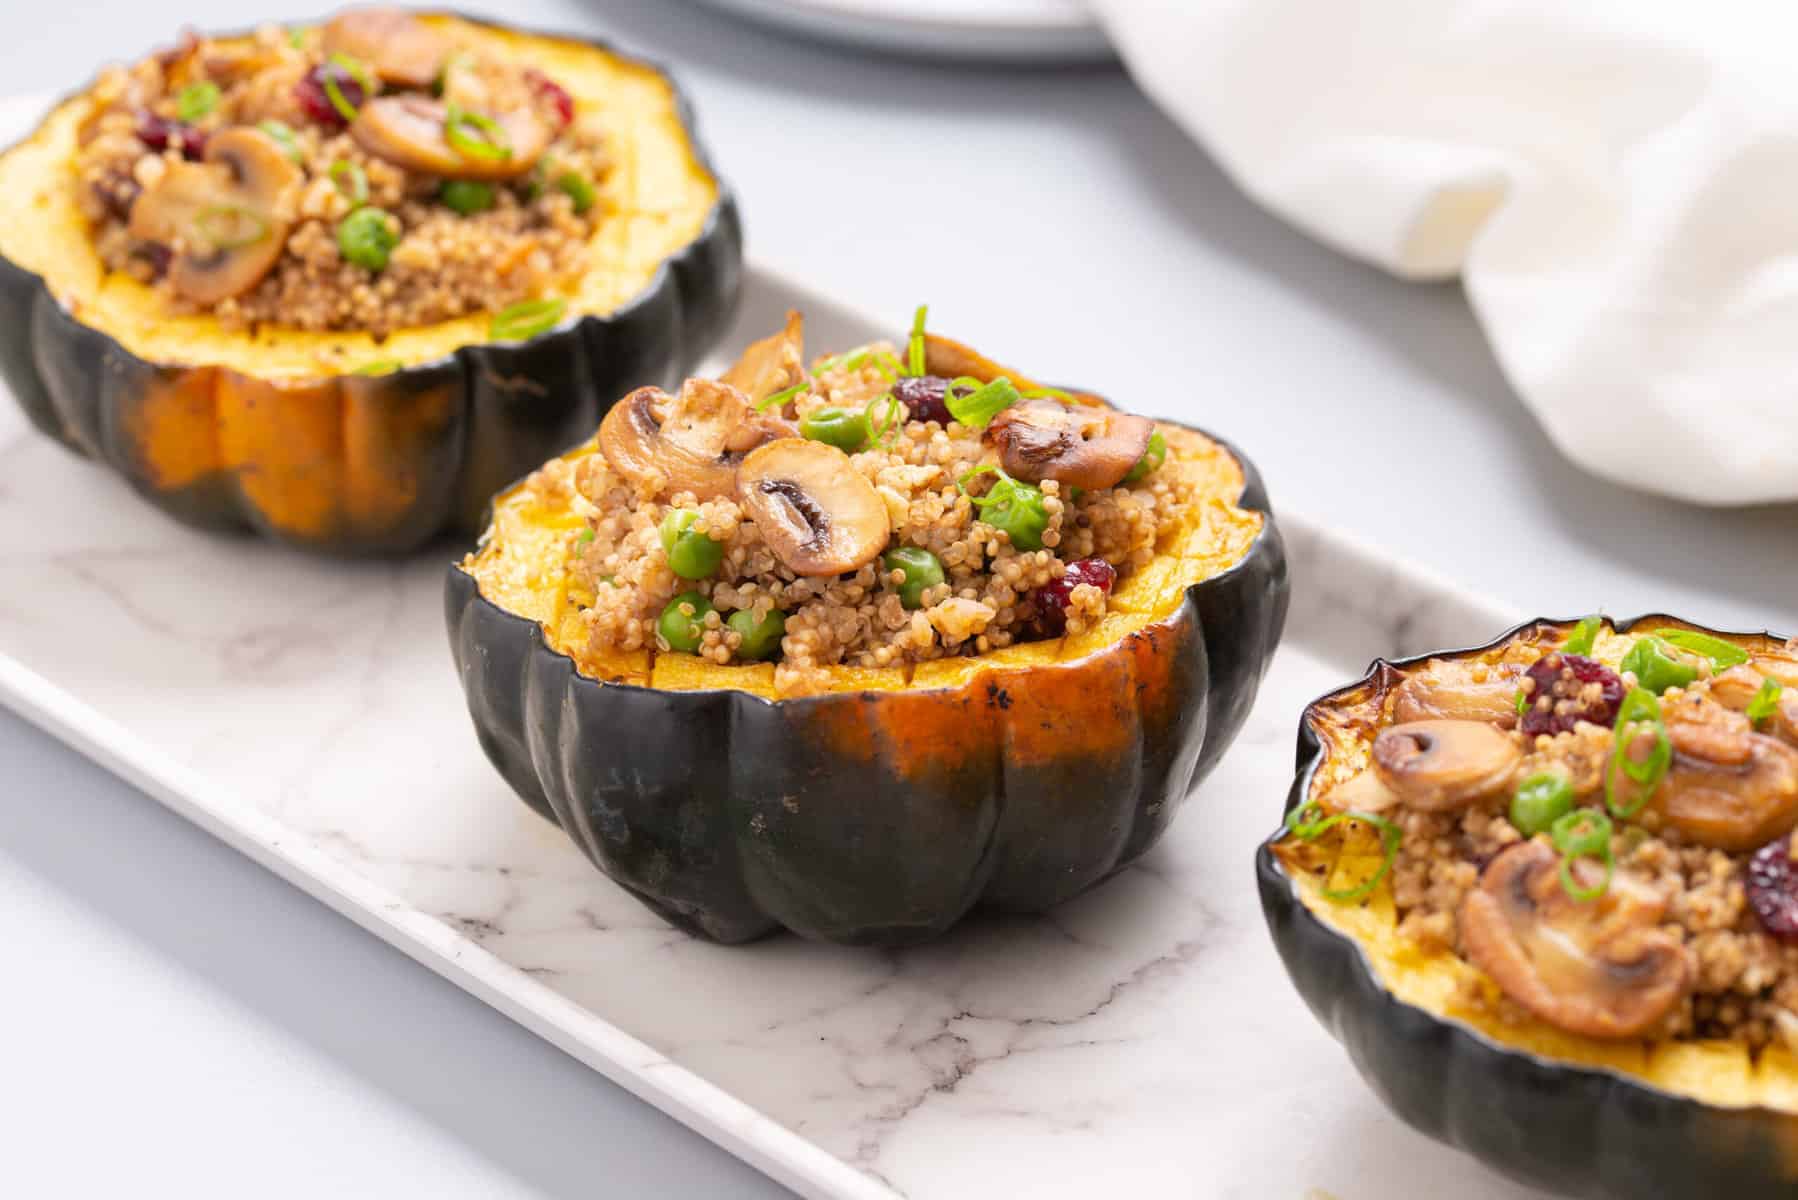 A close up view of three stuffed acorn squash placed in a serving plate.